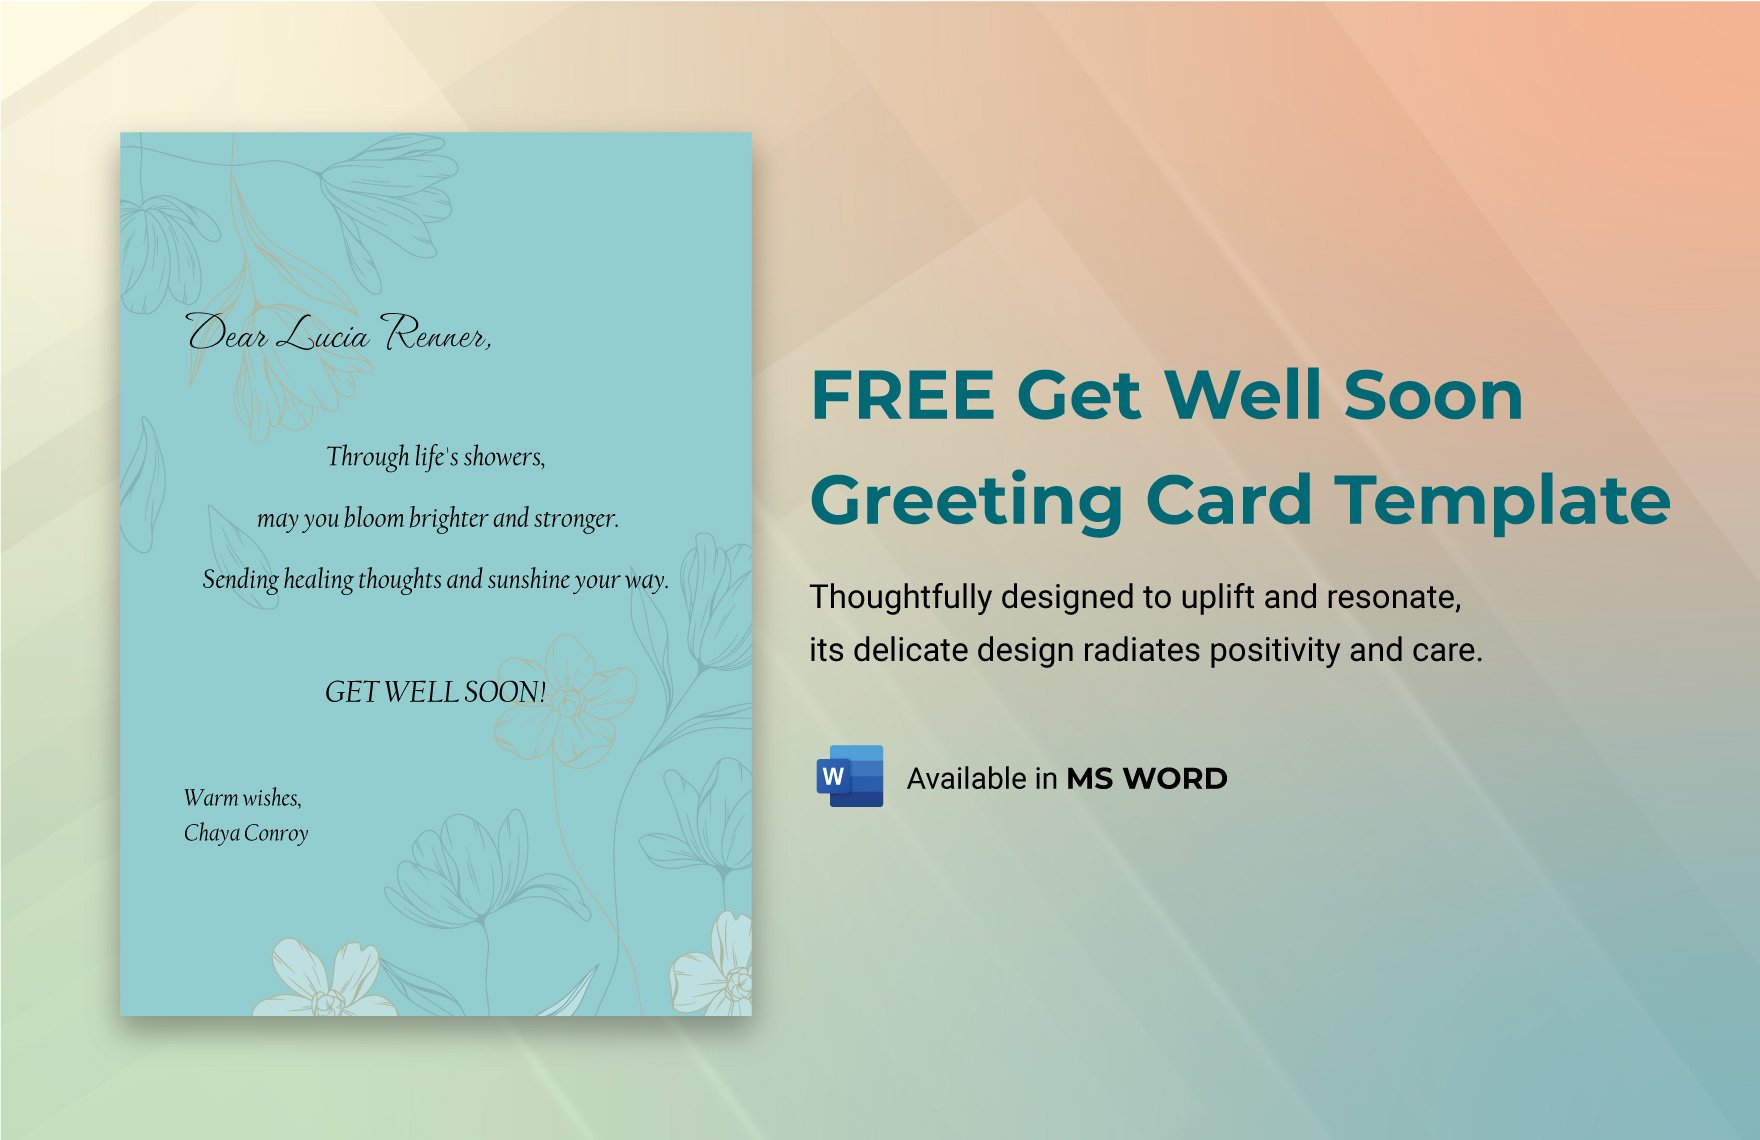 Get Well Soon Greeting Card Template